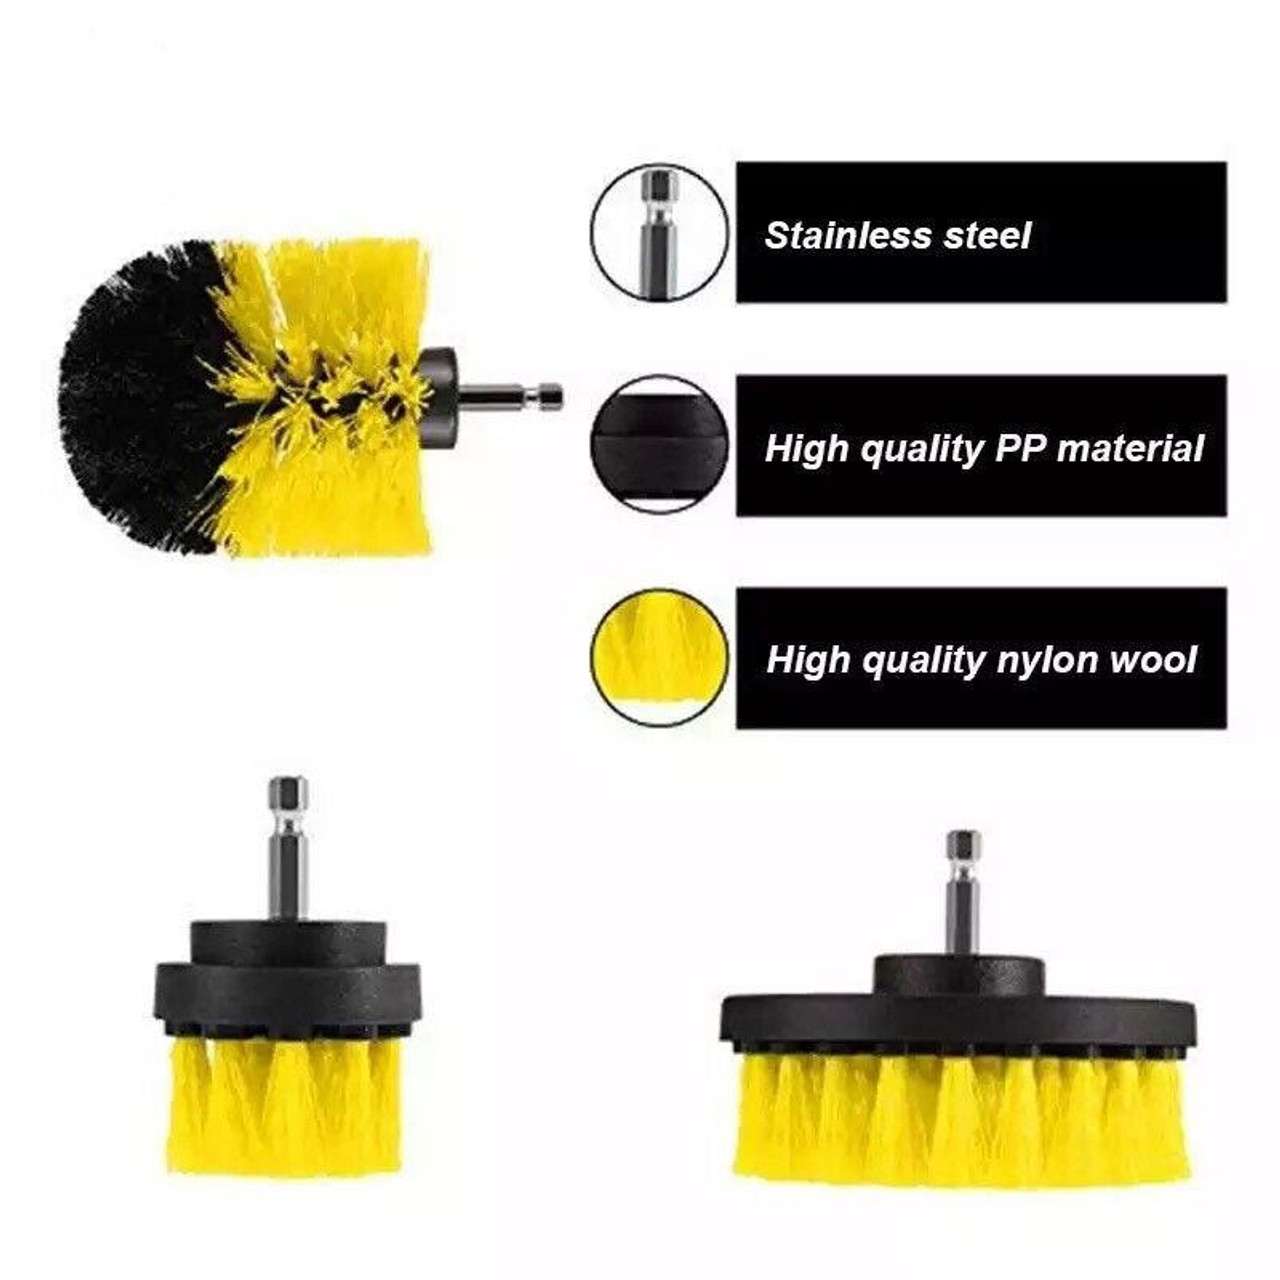 https://cdn11.bigcommerce.com/s-zrh8tkpr8d/images/stencil/1280x1280/products/9953/32956/3pcs-drill-brush-power-scrubber-drill-attachments-for-carpet-tile-grout-cleaning__86422.1665669152.jpg?c=2&imbypass=on